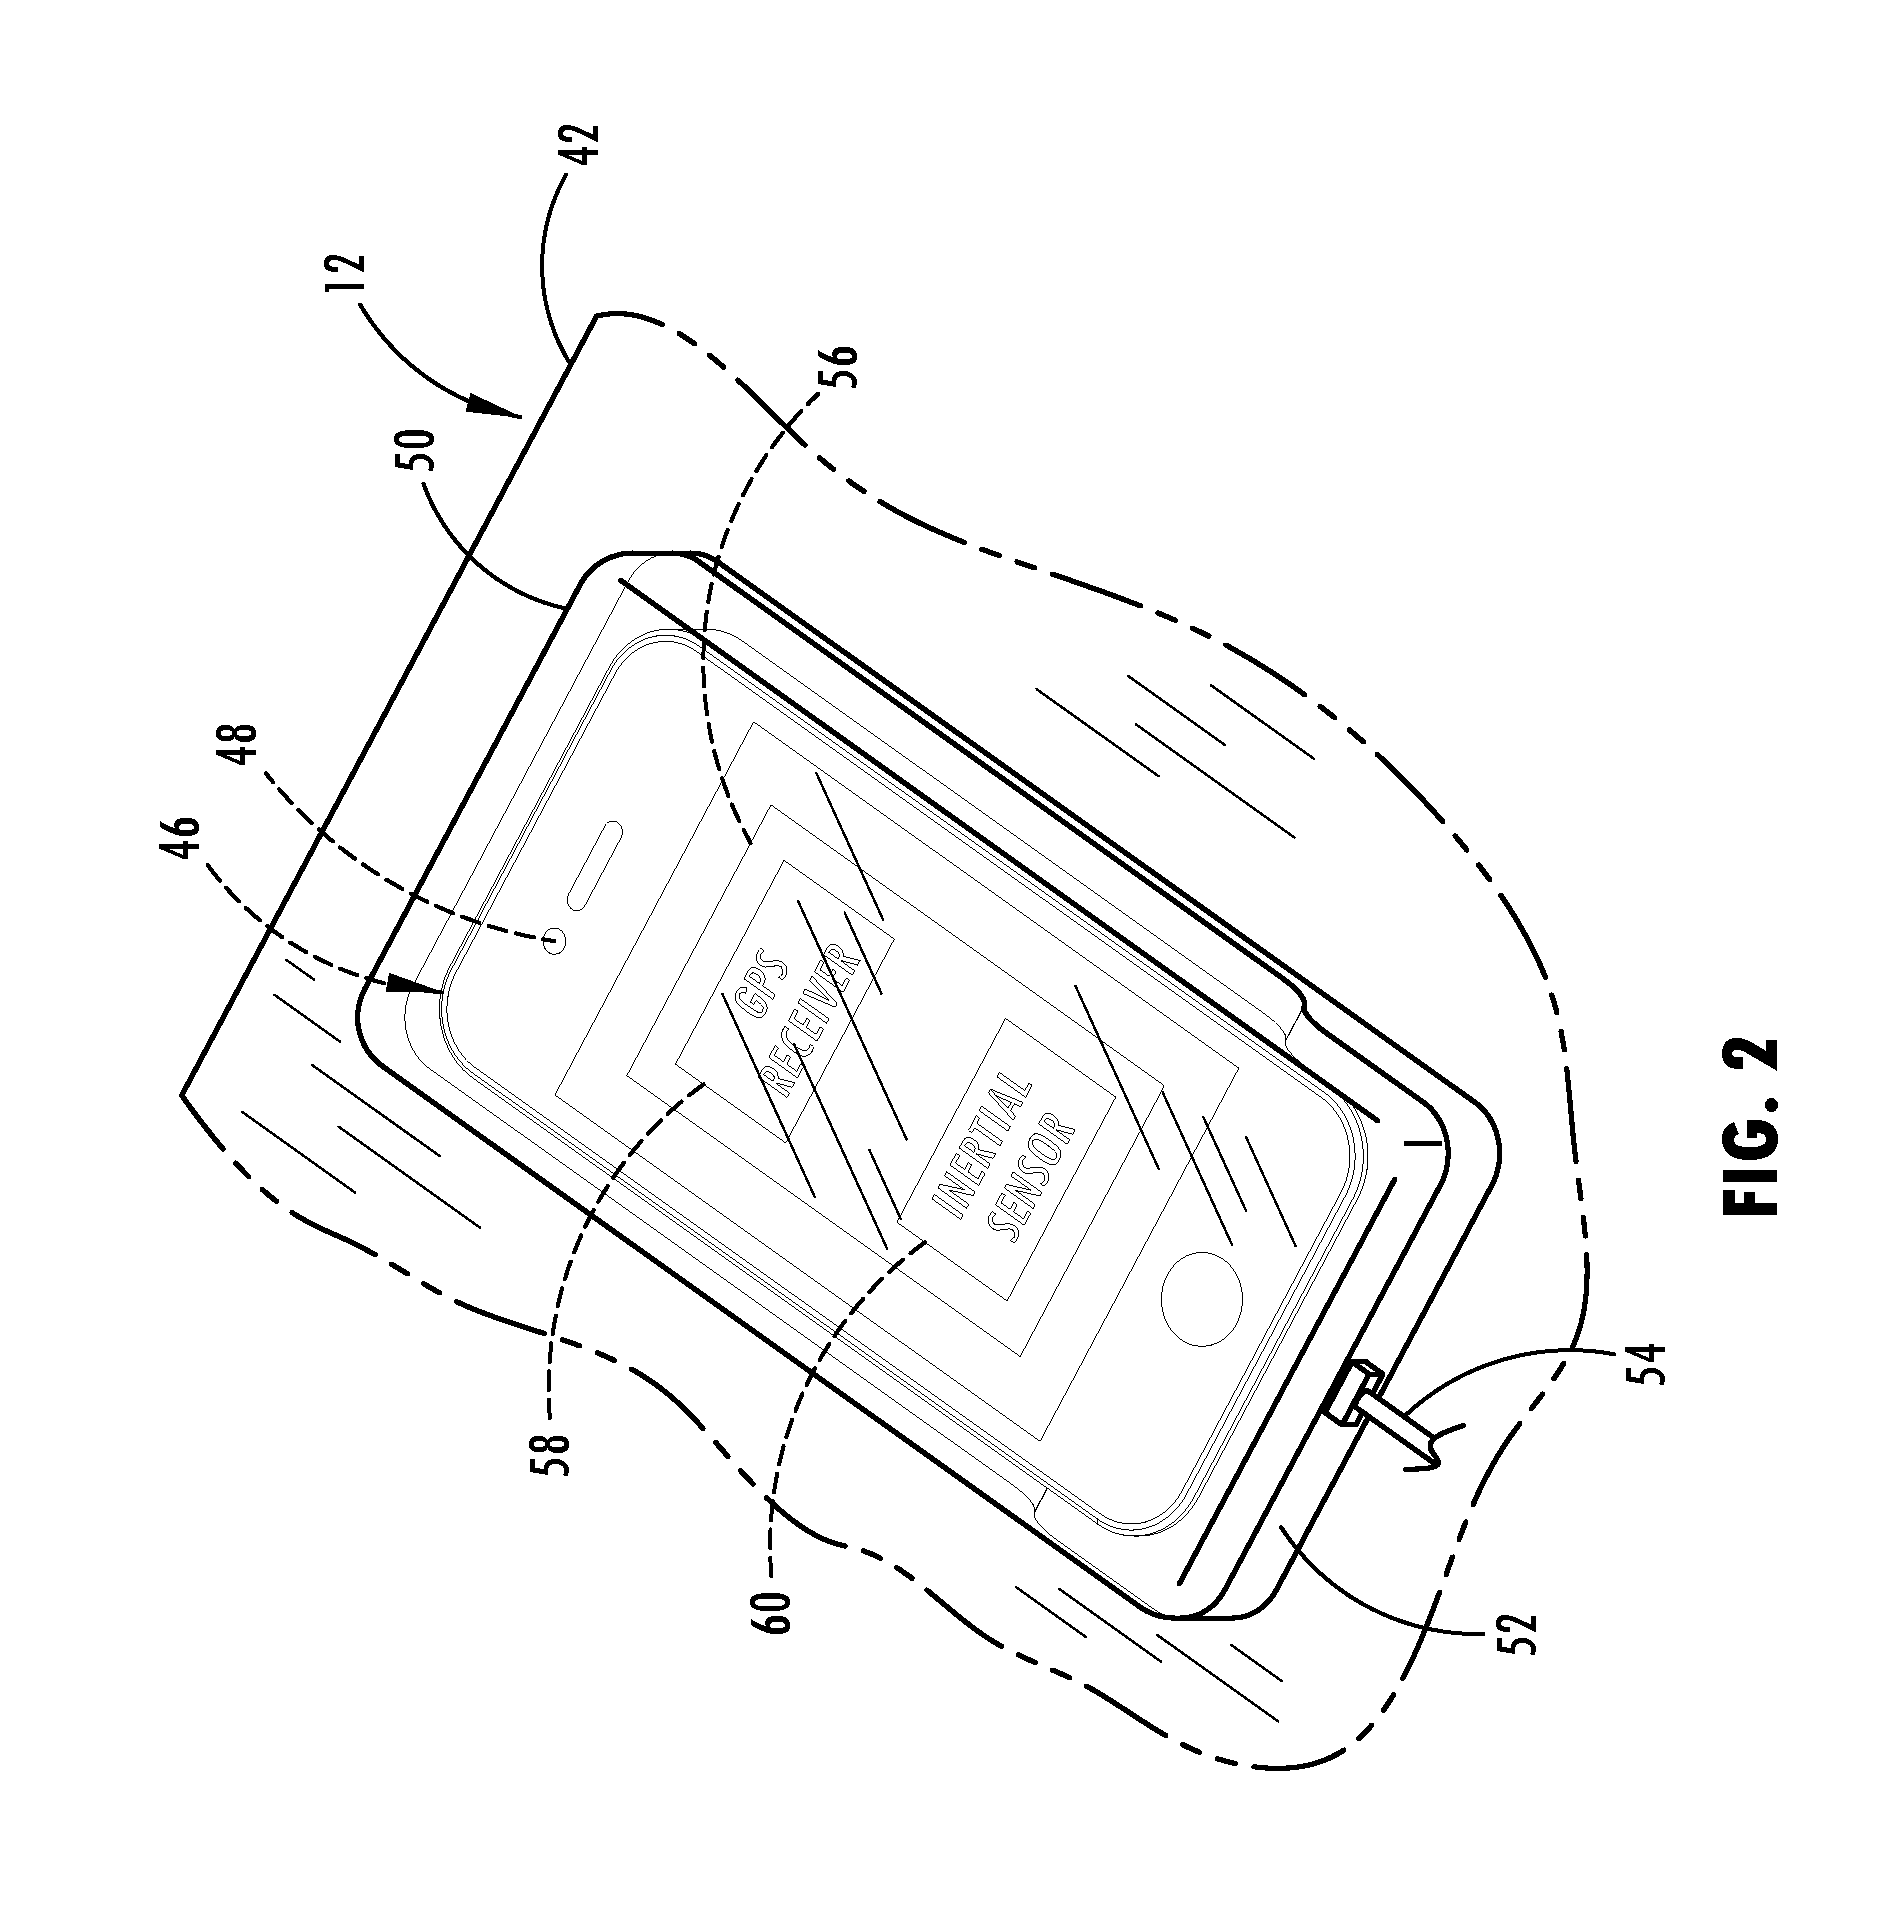 System and method of inputting an intended backing path